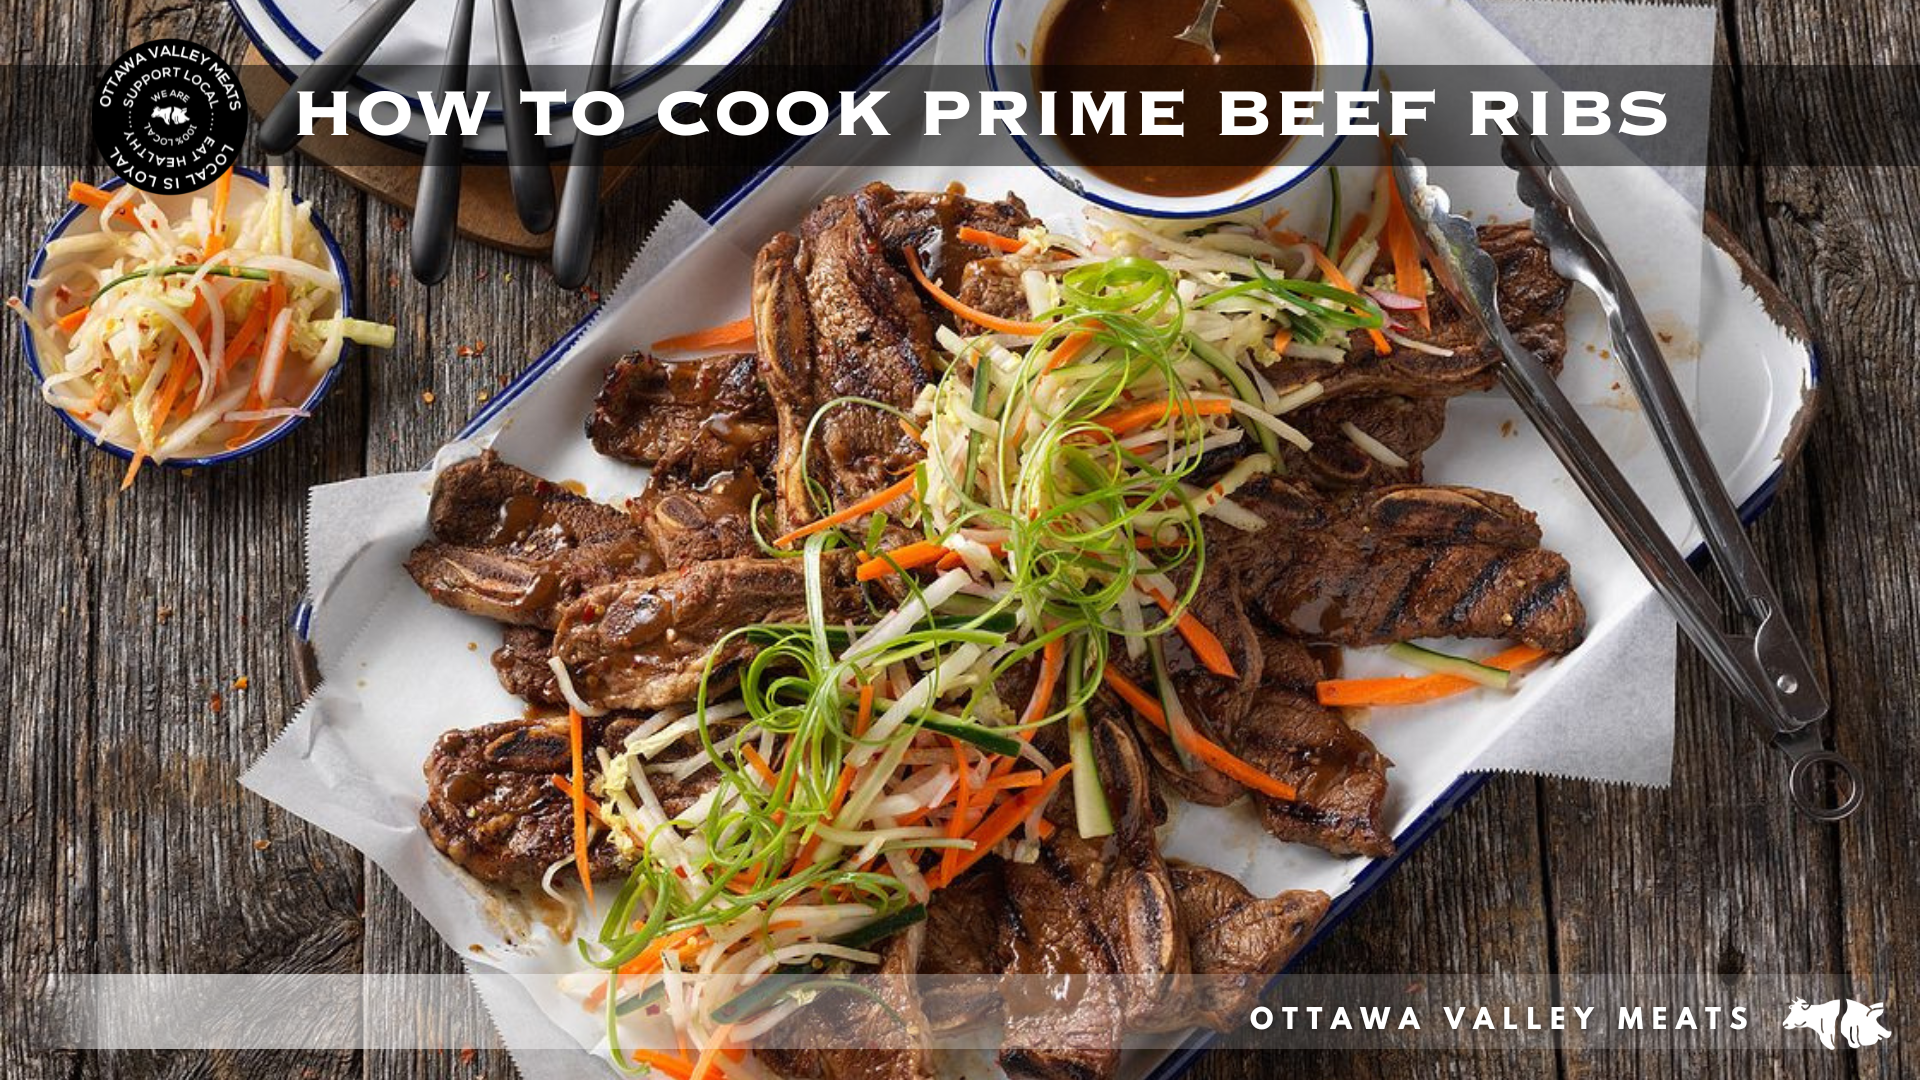 How To Cook Prime Beef Ribs